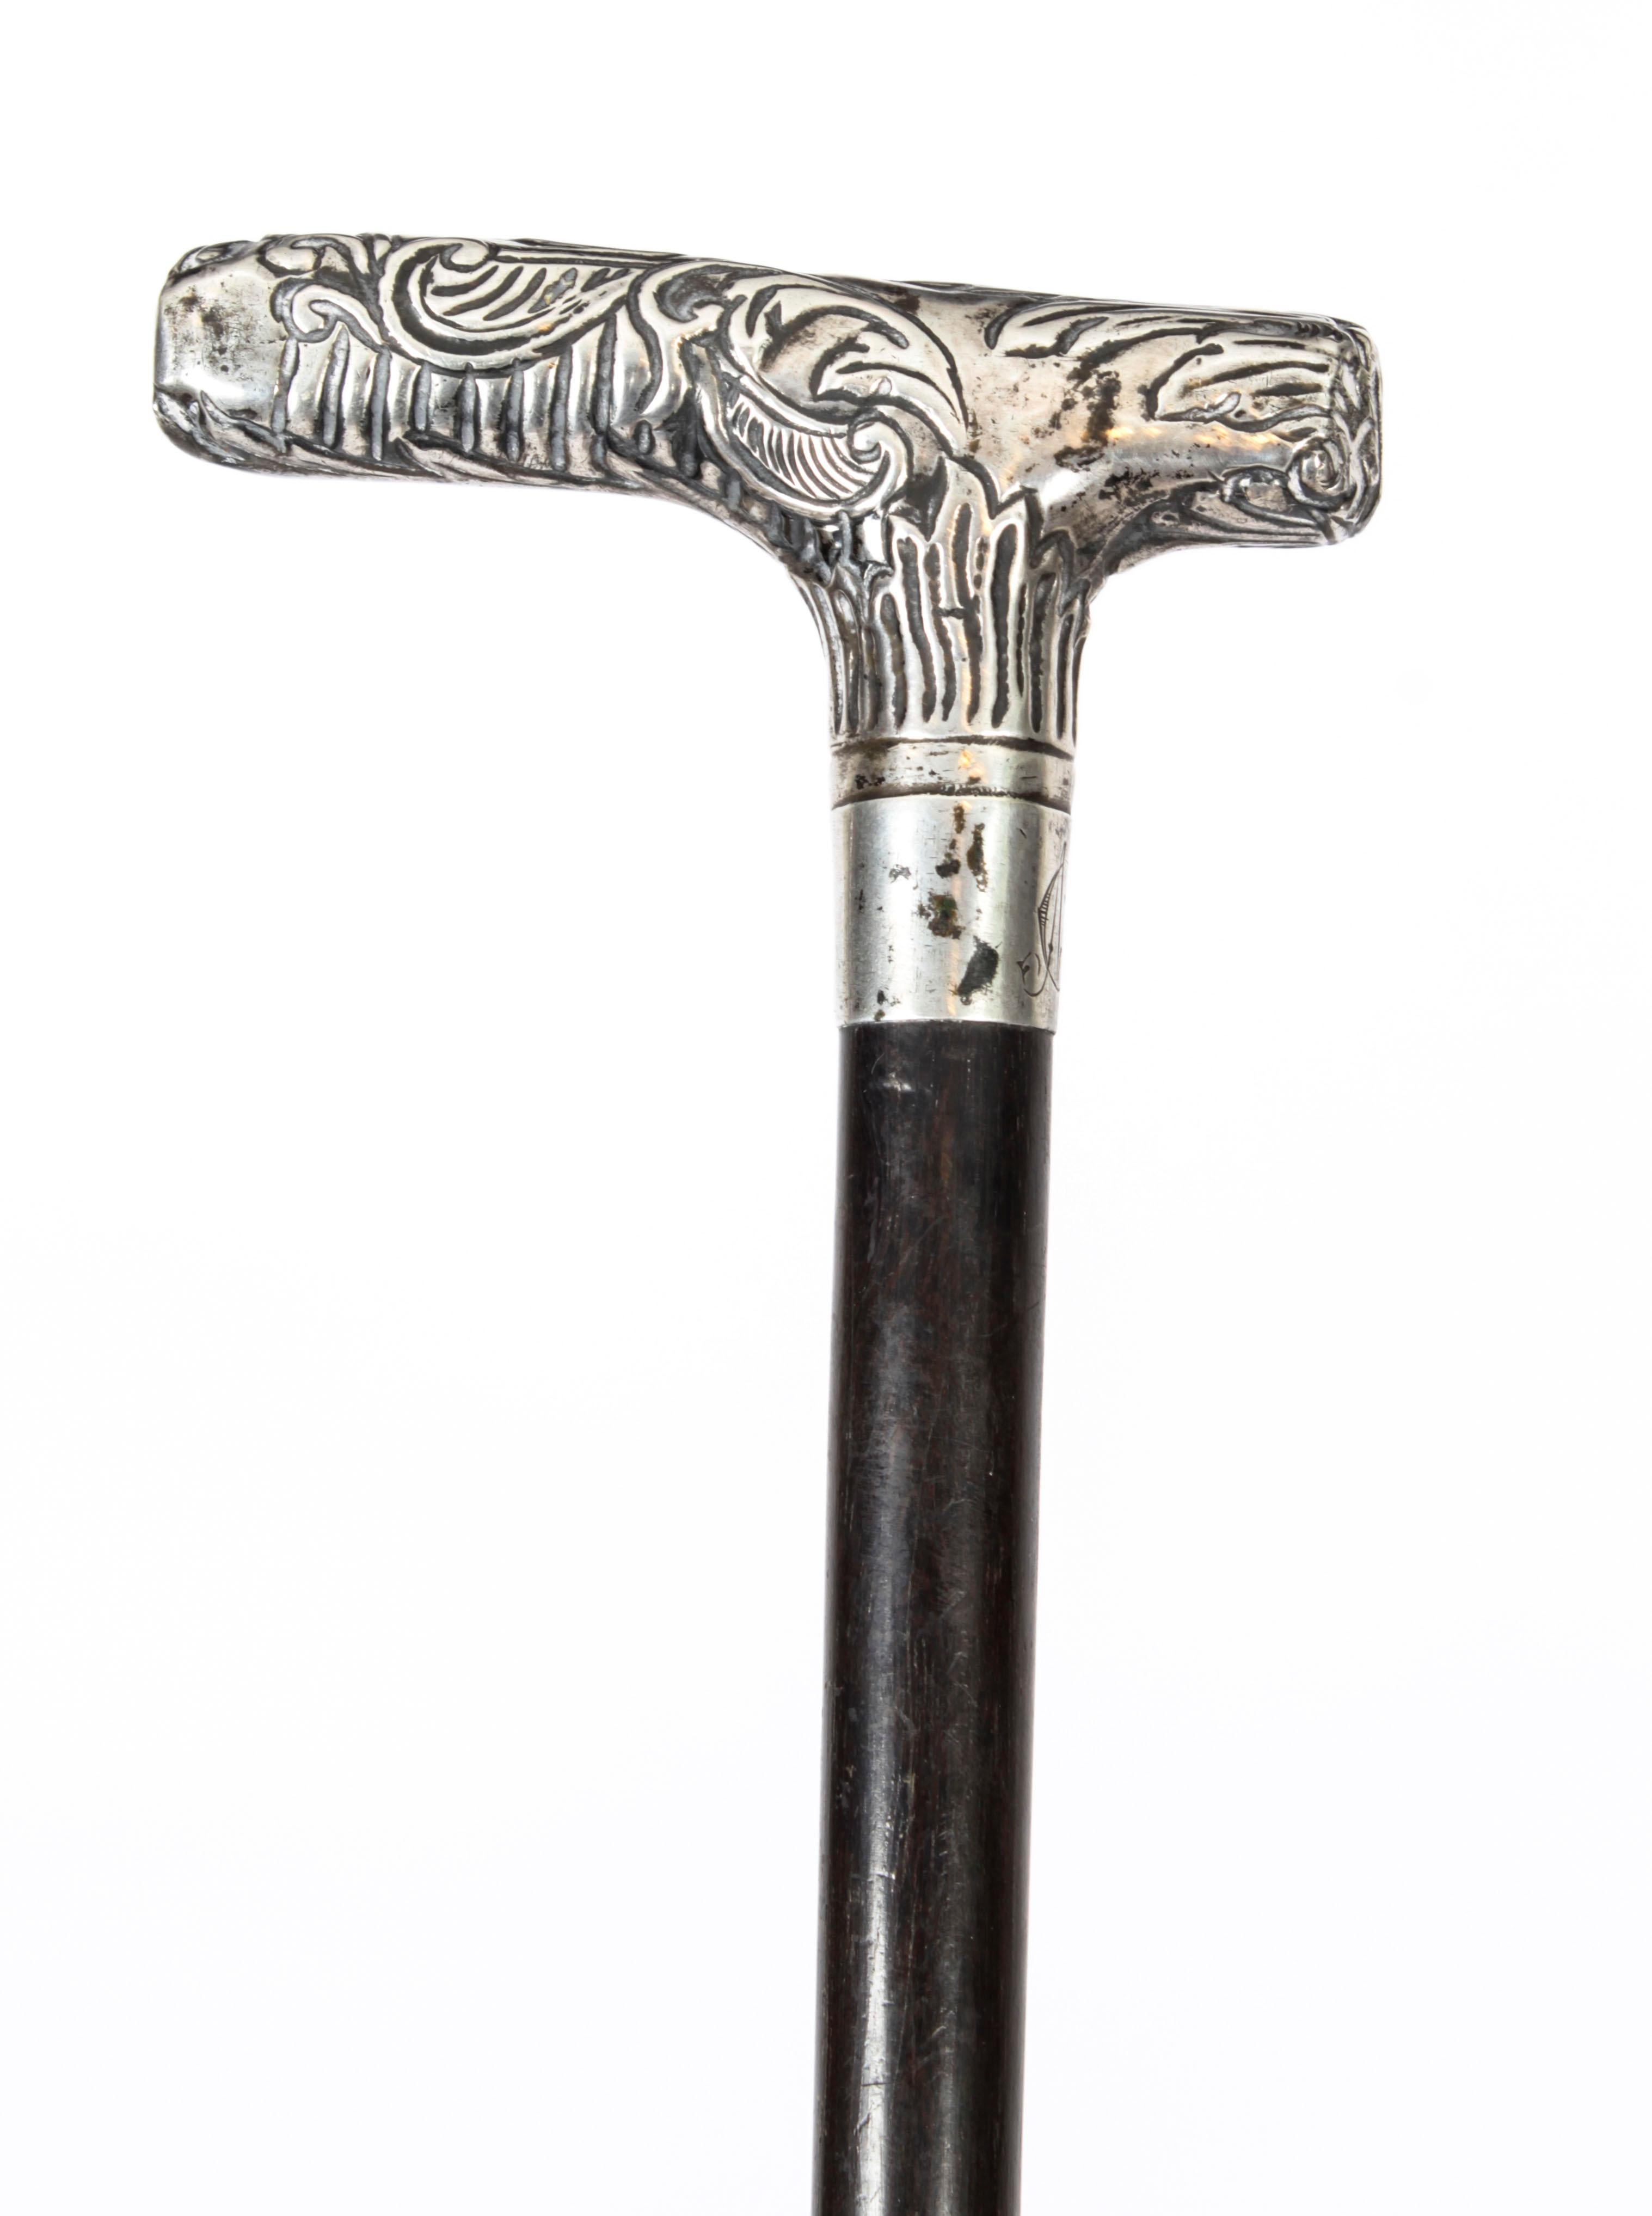 This is a fantastic antique French Art Noveau silver handled and ebonized walking stick, circa 1890 in date.
 
It has a very decorative silver lever handle decorated with foliate ornamentation which is cast with great attention to detail with a